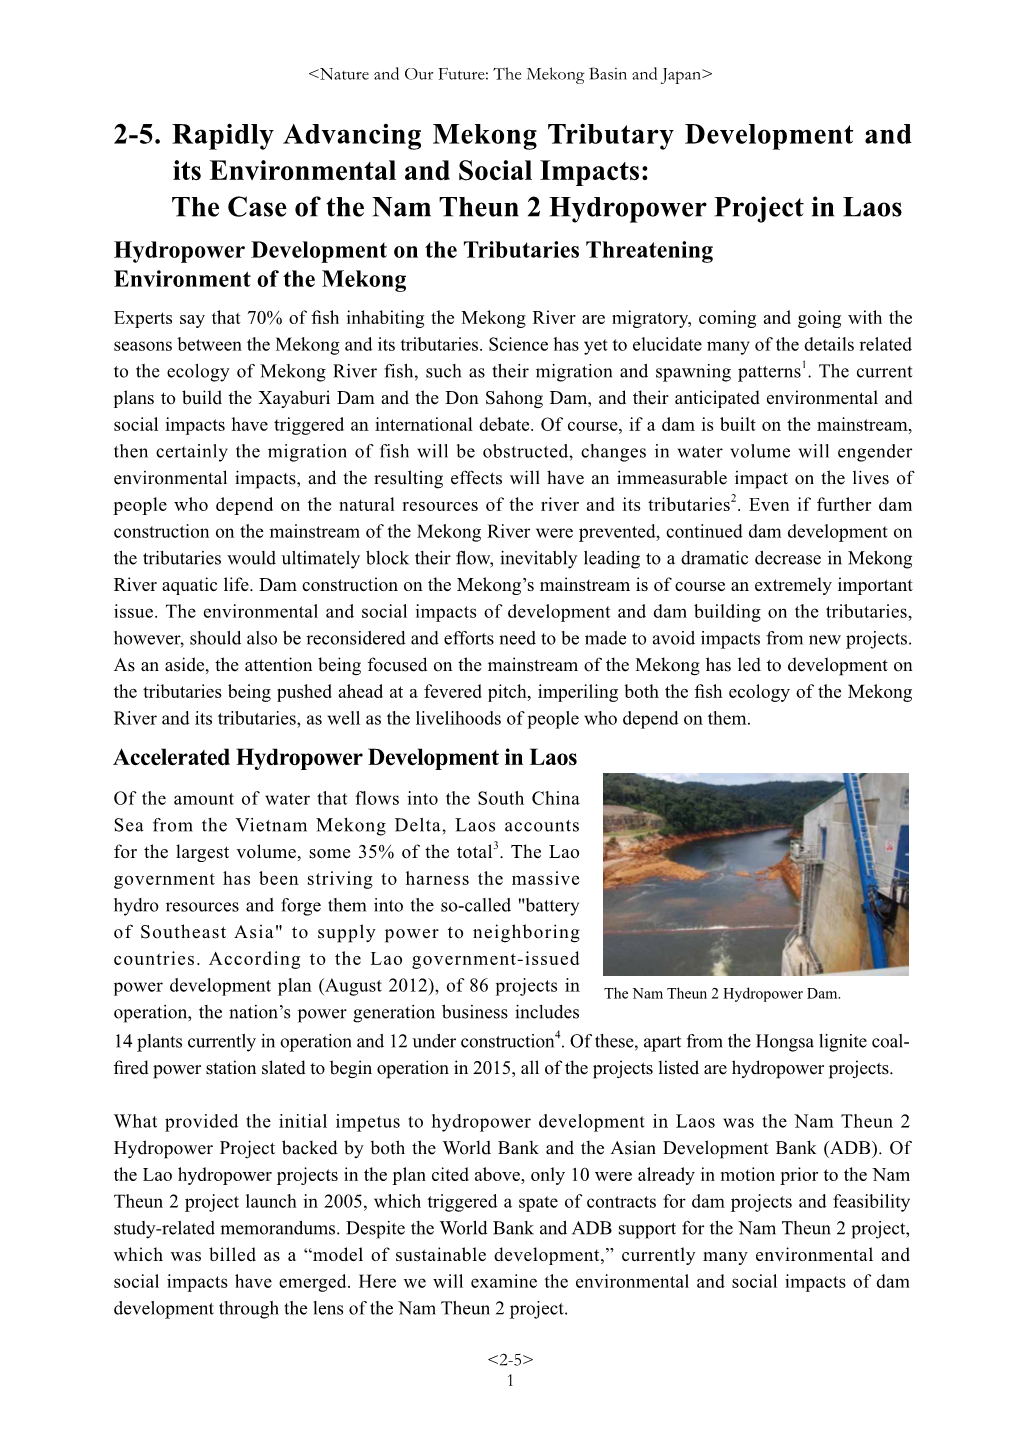 The Case of the Nam Theun 2 Hydropower Project in Laos